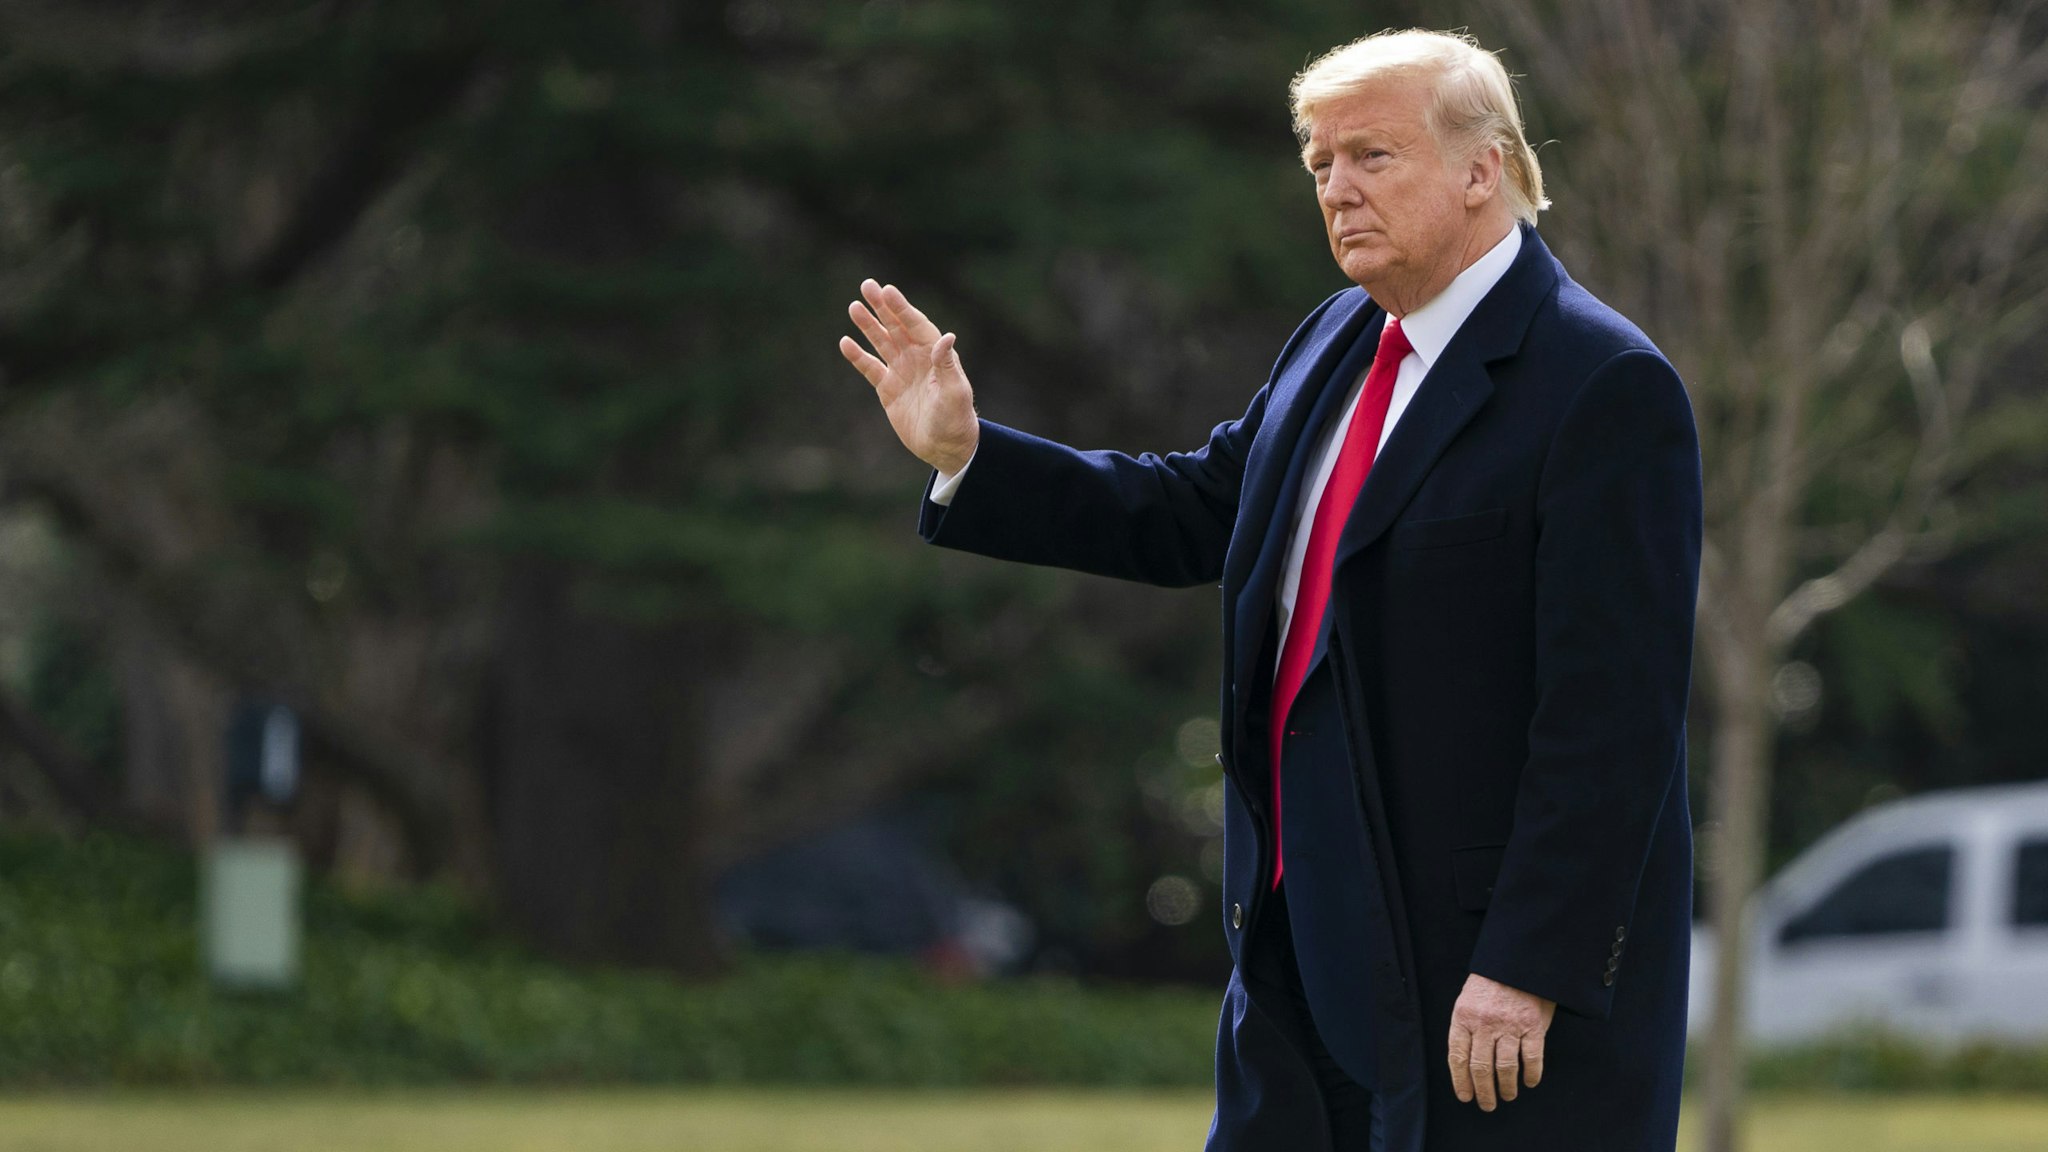 U.S. President Donald Trump gestures while walking across the South Lawn of the White House to board Marine One in Washington, D.C., U.S. on Thursday, Jan. 30, 2020. Senate Republicans say they're growing confident that they have the votes to block testimony from new witnesses in Trump's impeachment trial and acquit the president as early as Friday.